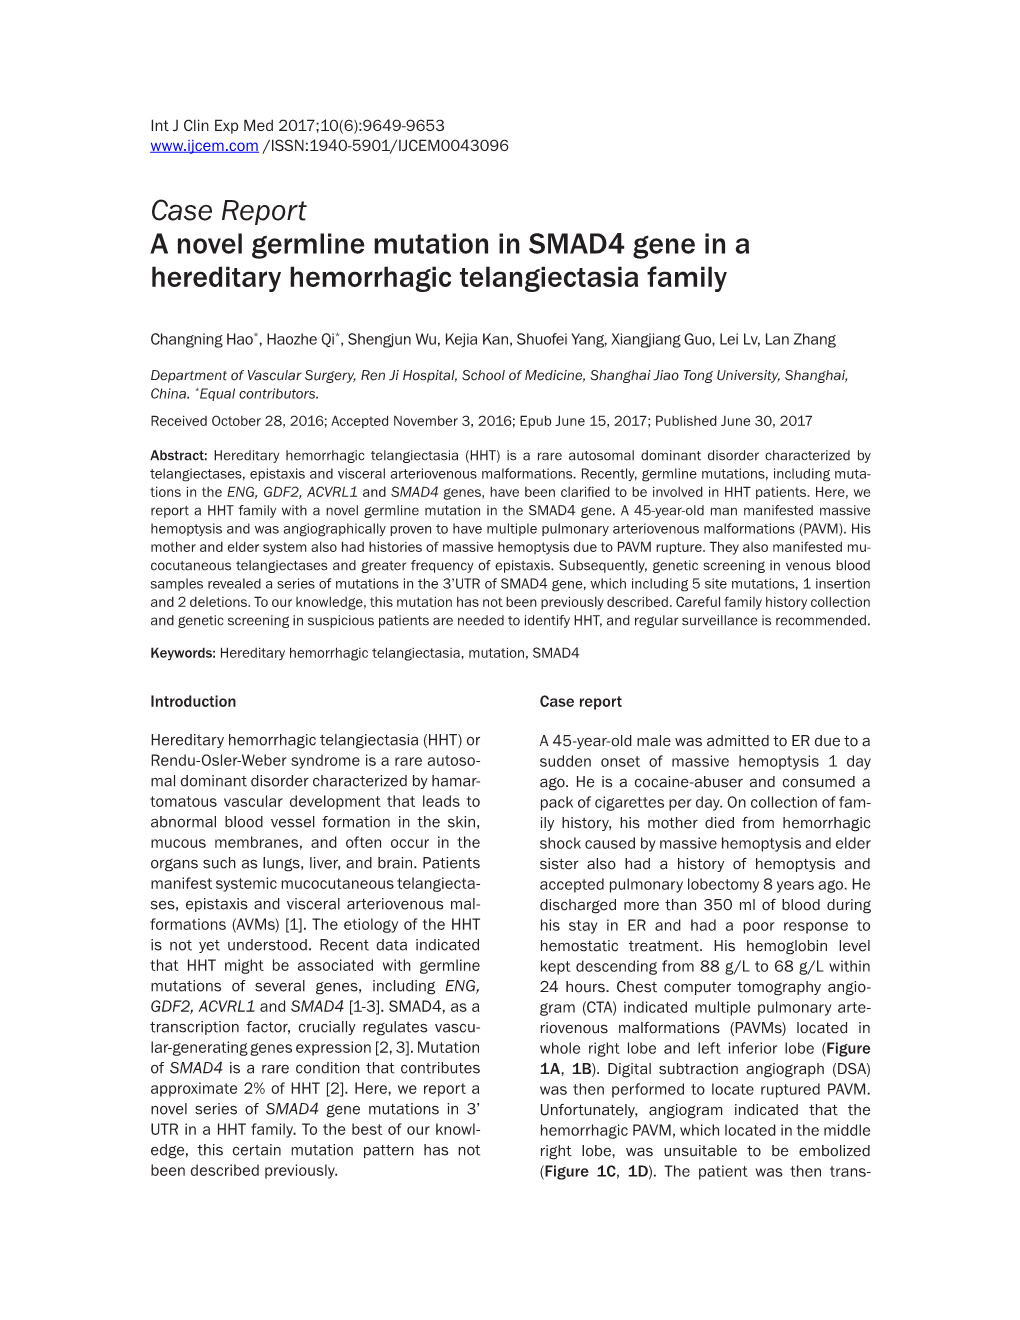 Case Report a Novel Germline Mutation in SMAD4 Gene in a Hereditary Hemorrhagic Telangiectasia Family